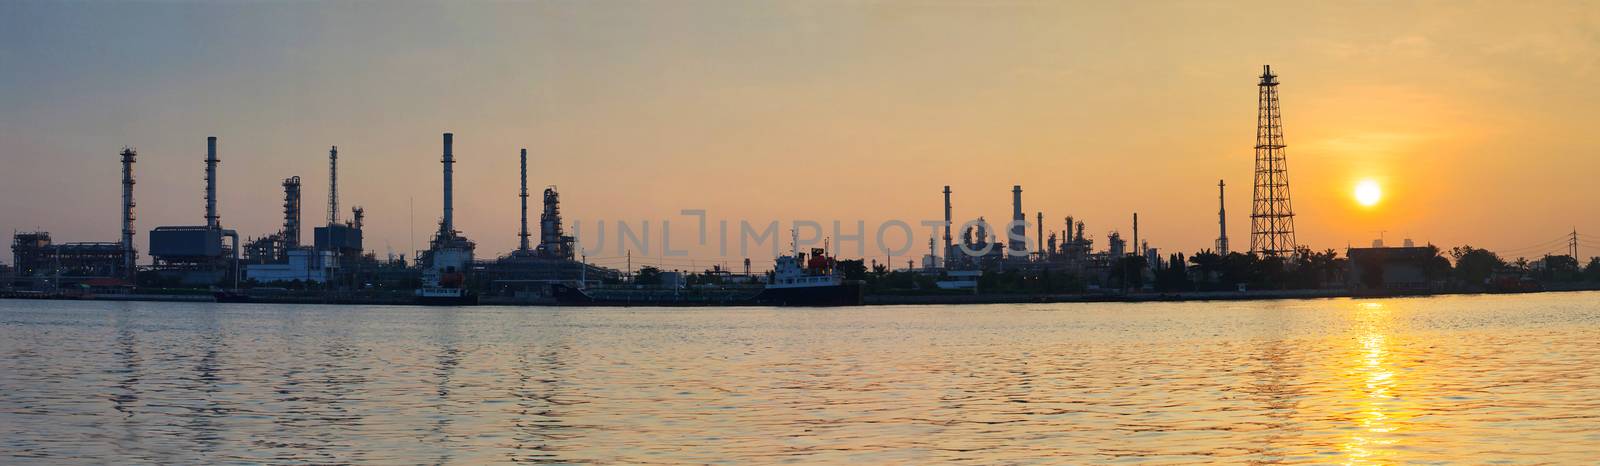 beautiful sun rising scene with oil ,gas refinery industry estat by khunaspix